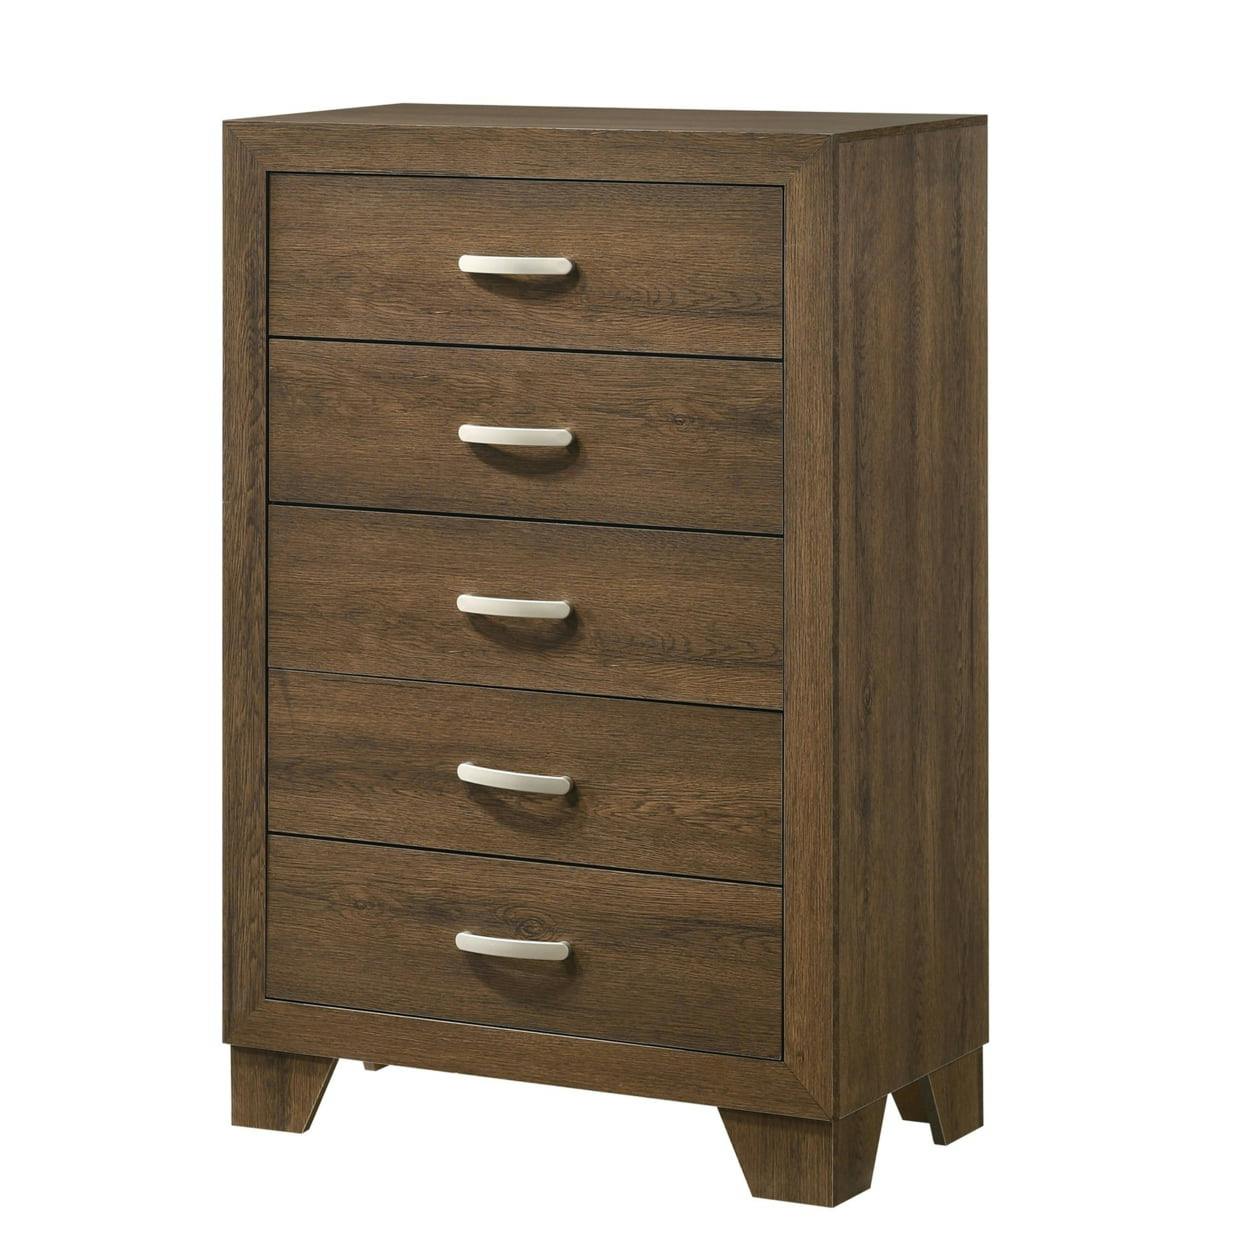 Transitional Brown Wooden Chest with Metal Handles and Bracket Legs